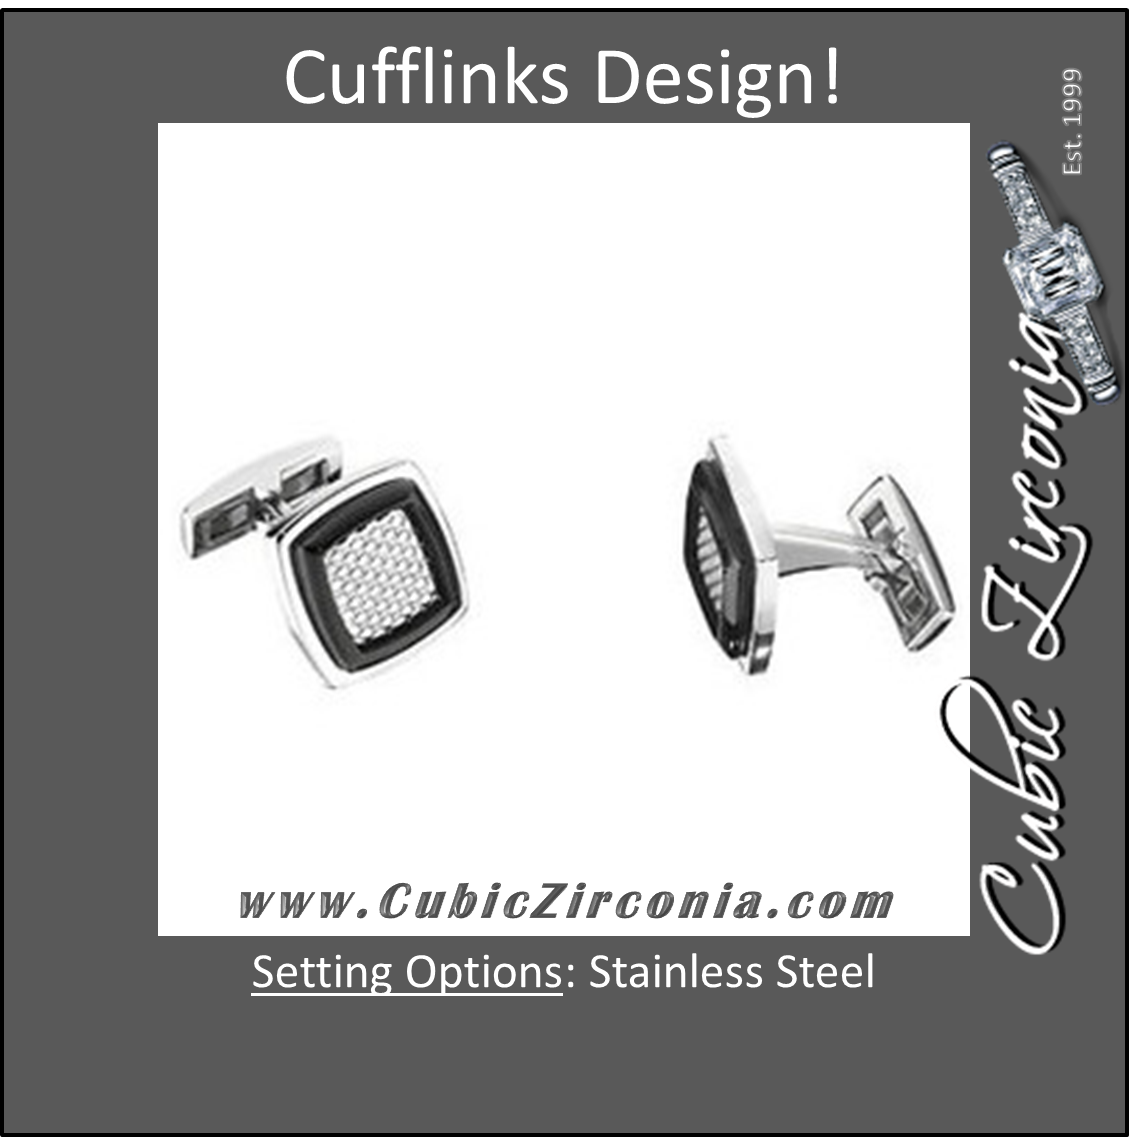 Men’s Cufflinks- Stainless Steel Rectangular Shape with Black Enamel Inlay and Textured Center